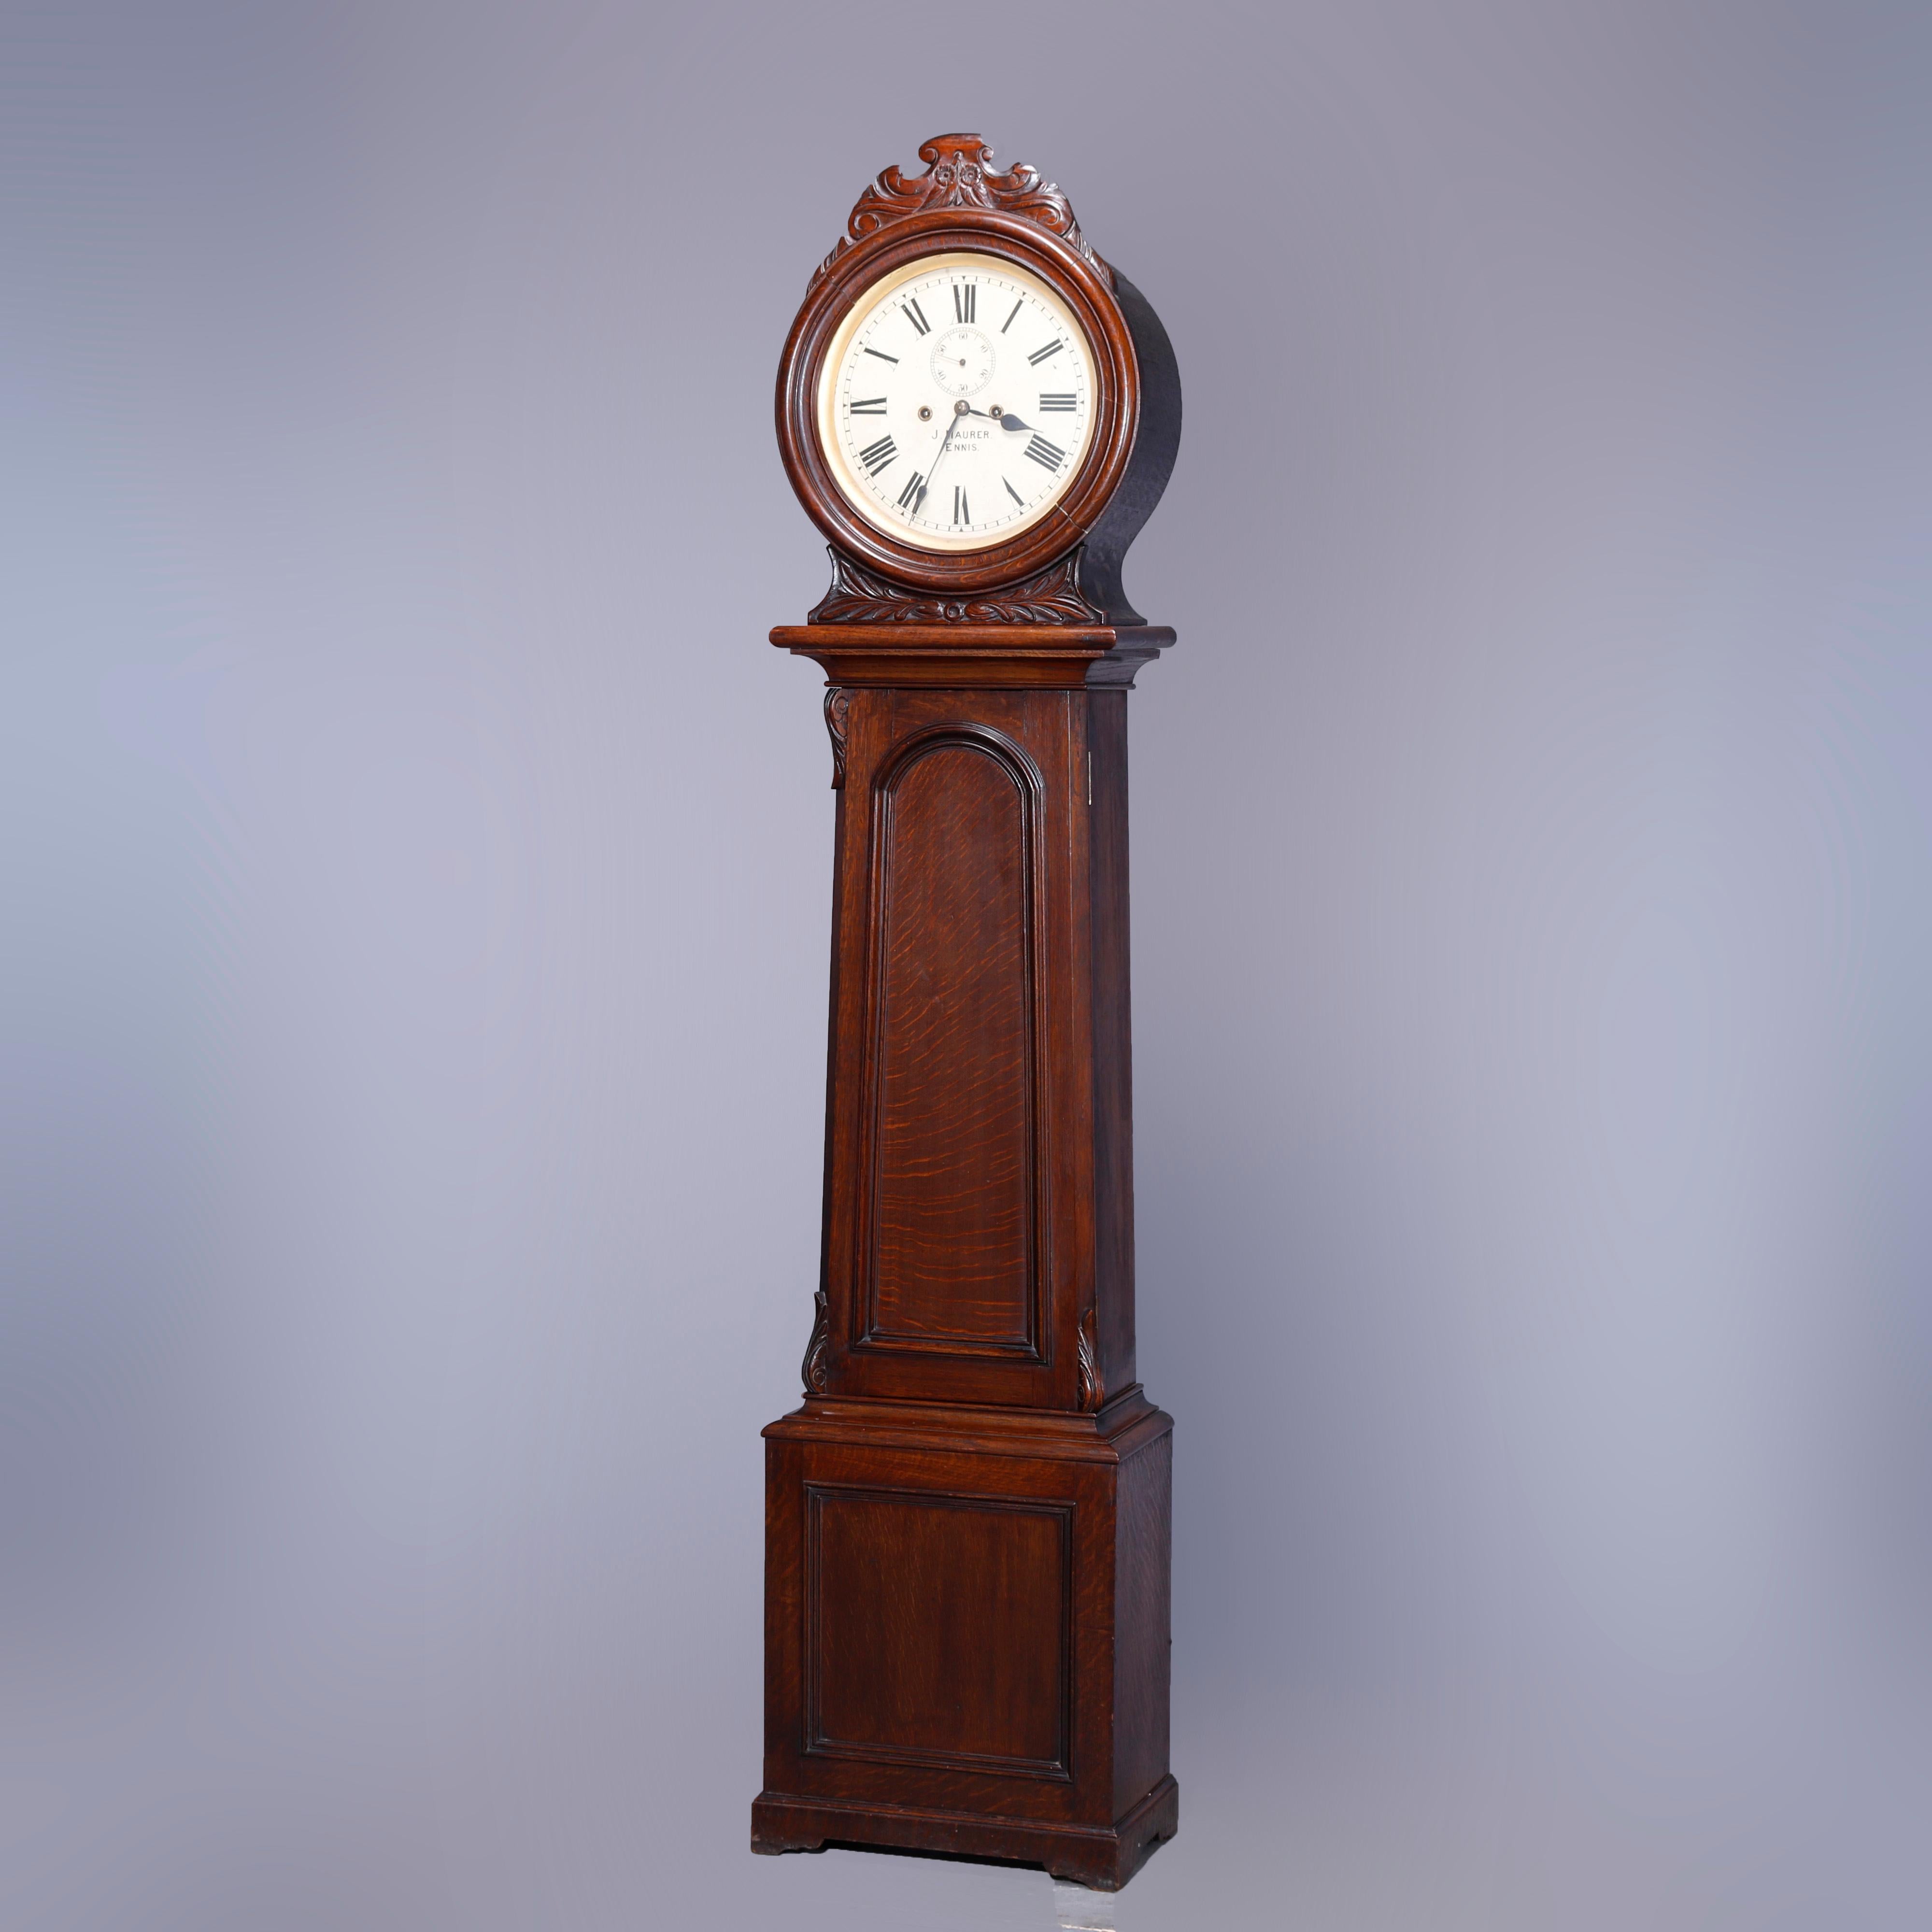 An antique English tall case clock by J. Maurer, Ennis offers oak case with circular hood having carved foliate elements surmounting flared and paneled trunk raised on bracket feet, maker or retailer signed on face, weight driven, complete and not